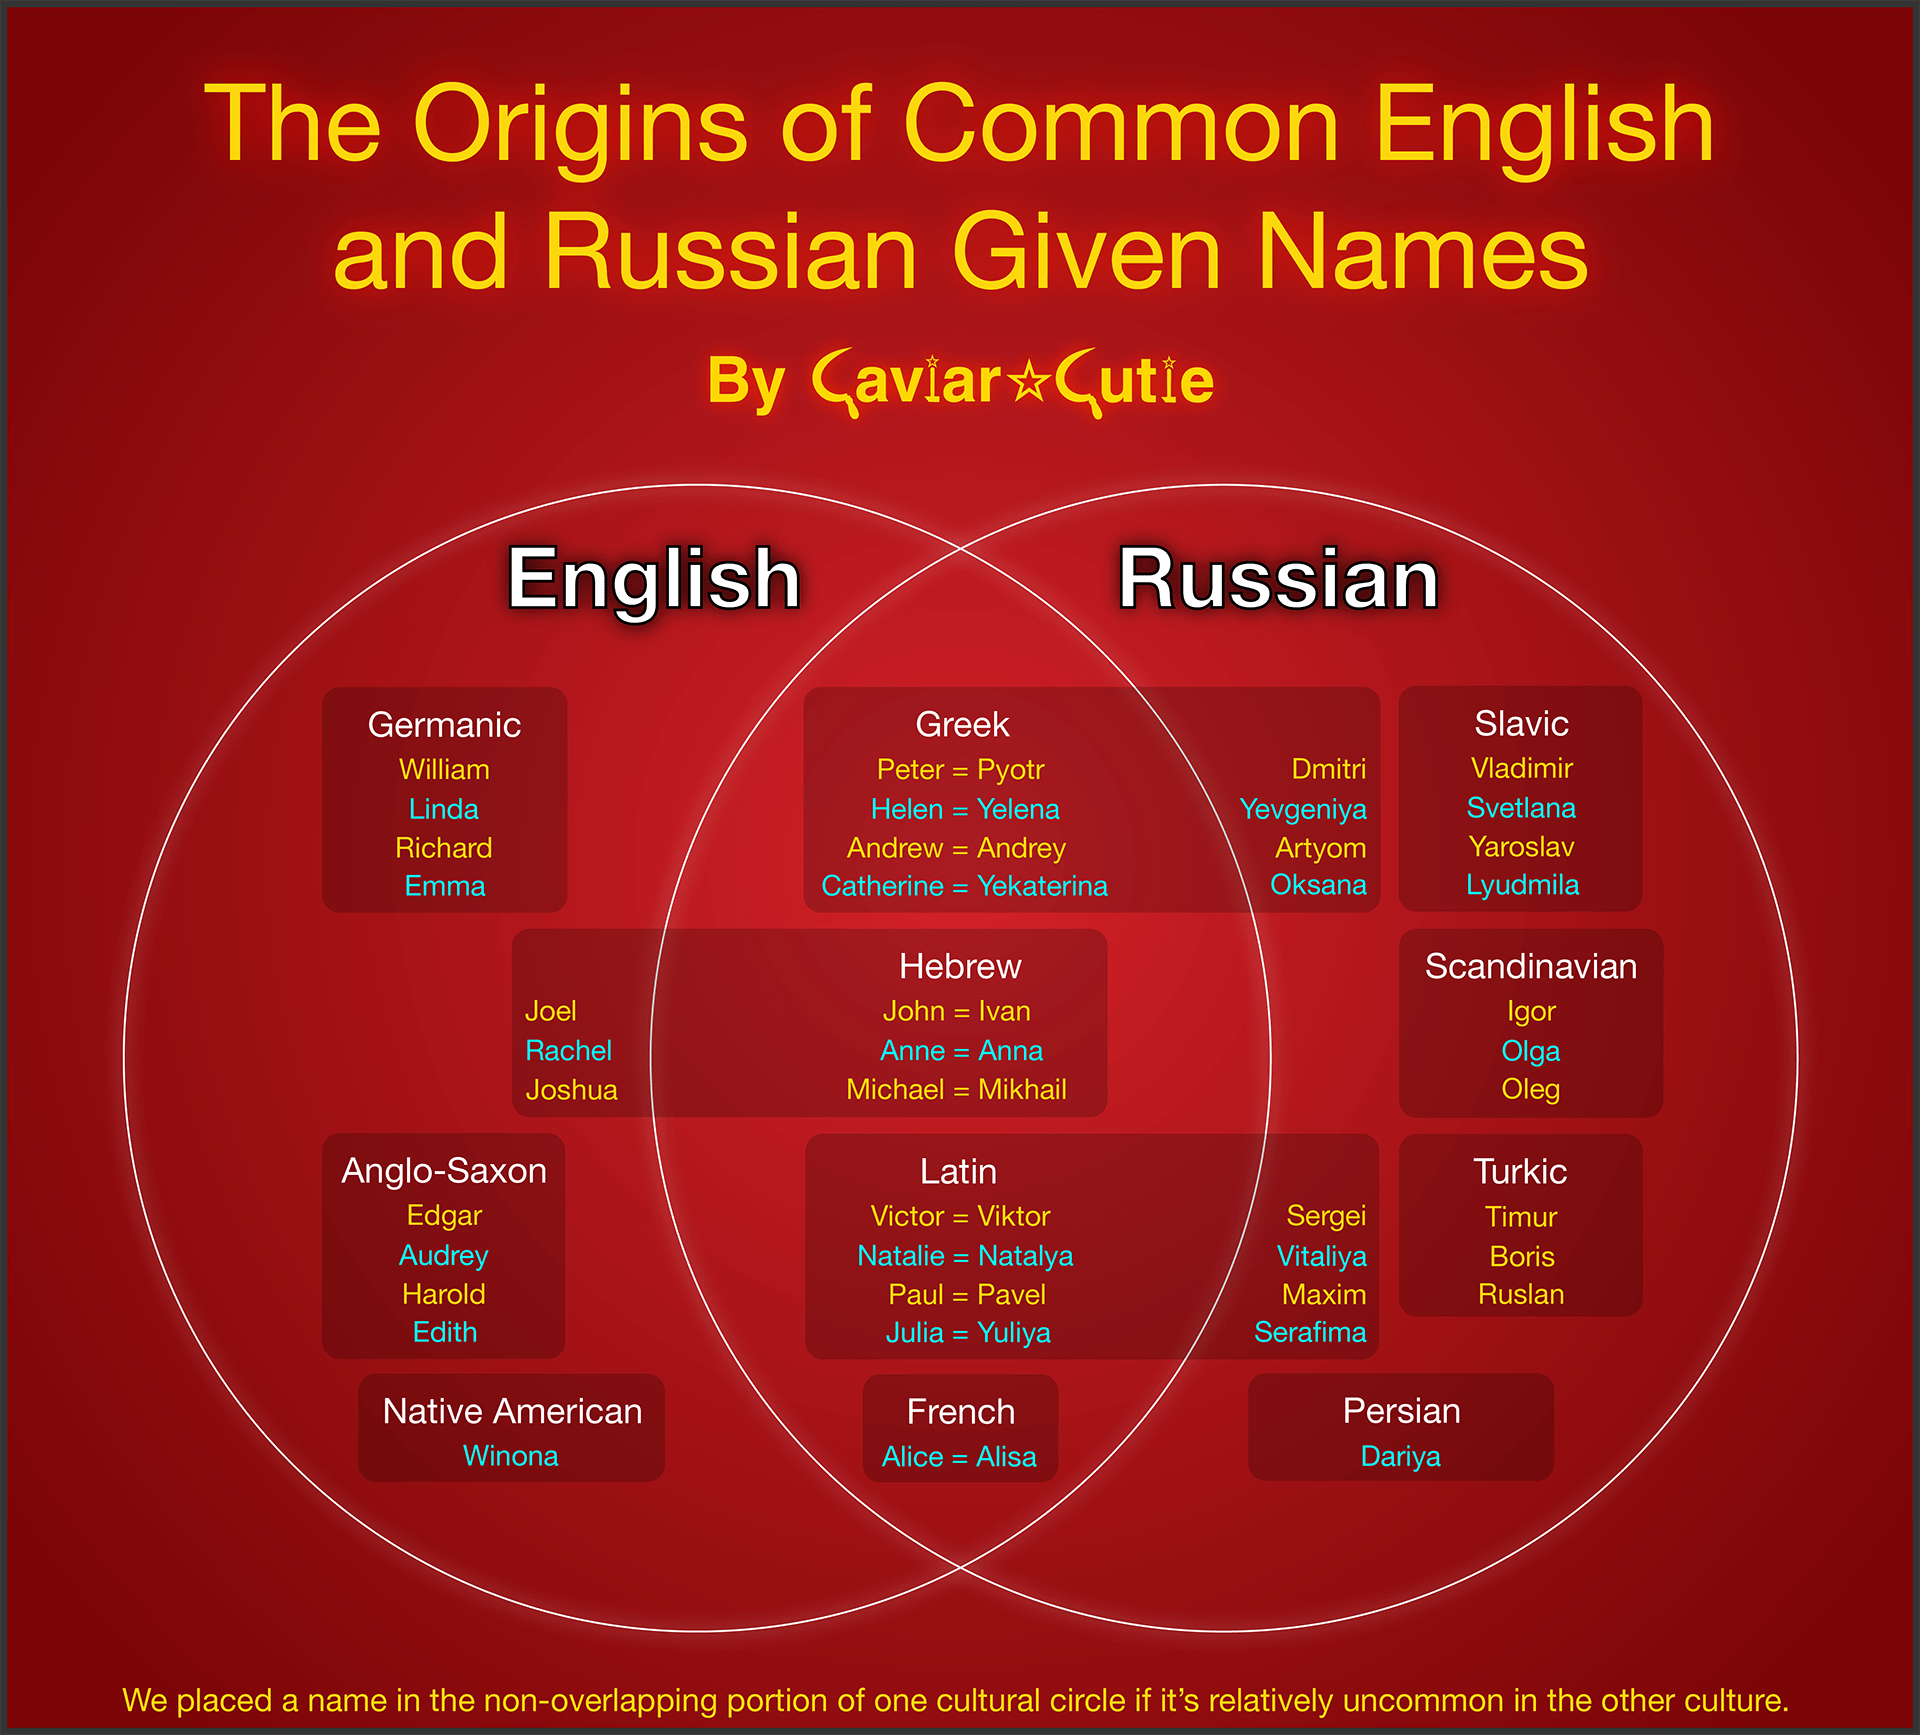 The Evolution of Russian Surnames in the 19th Century: A Fascinating Look at Ancestral Naming Practices